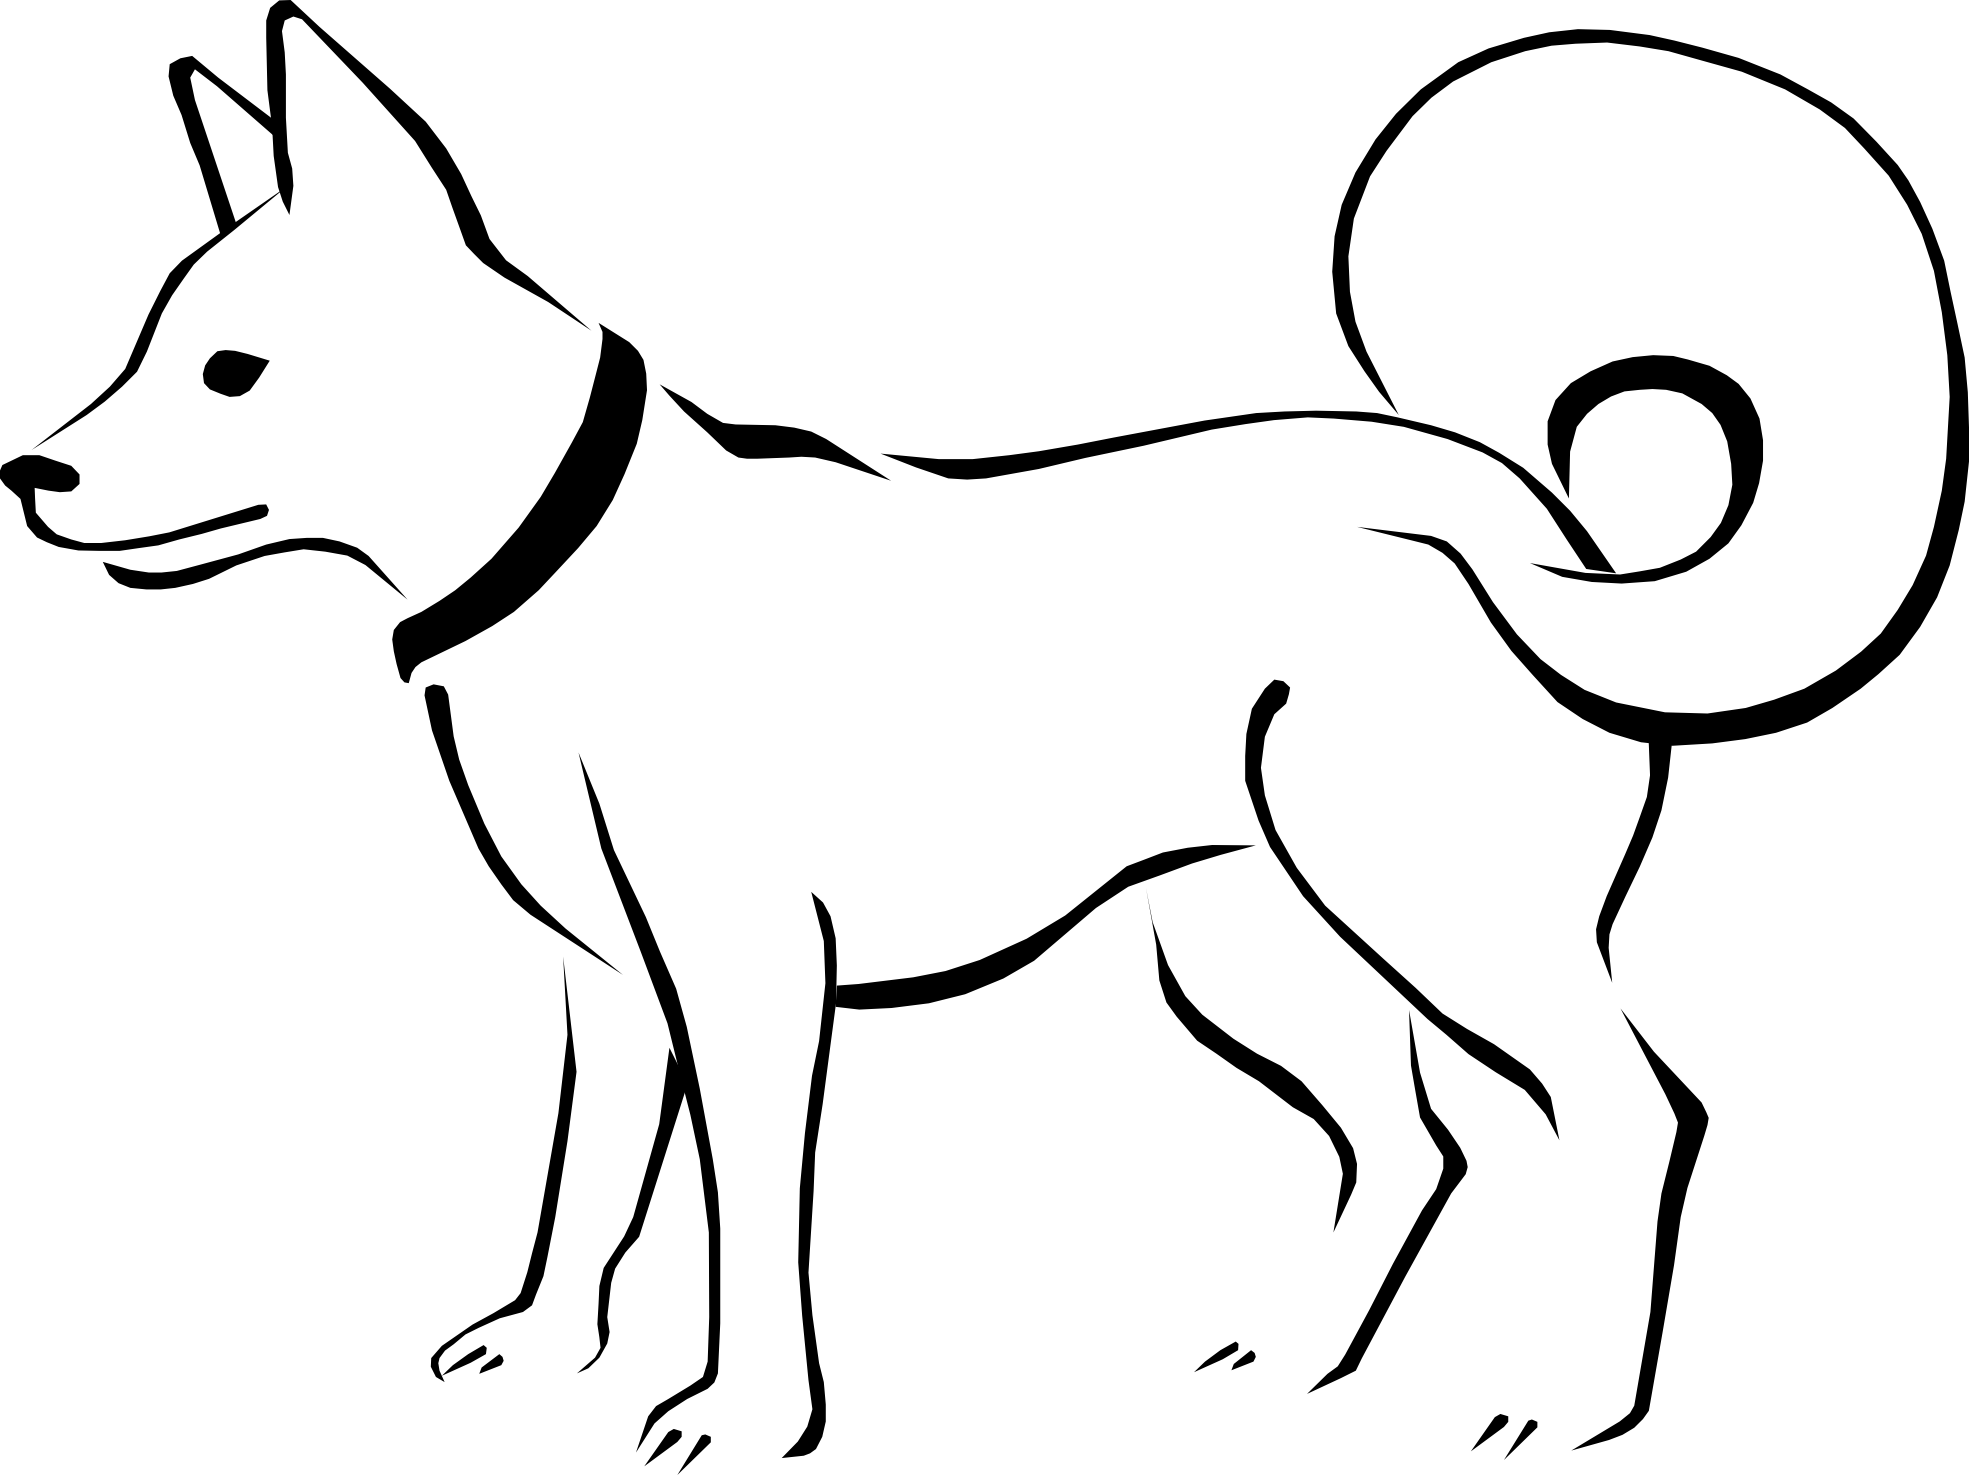 Puppy Clipart Black And White - ClipArt Best